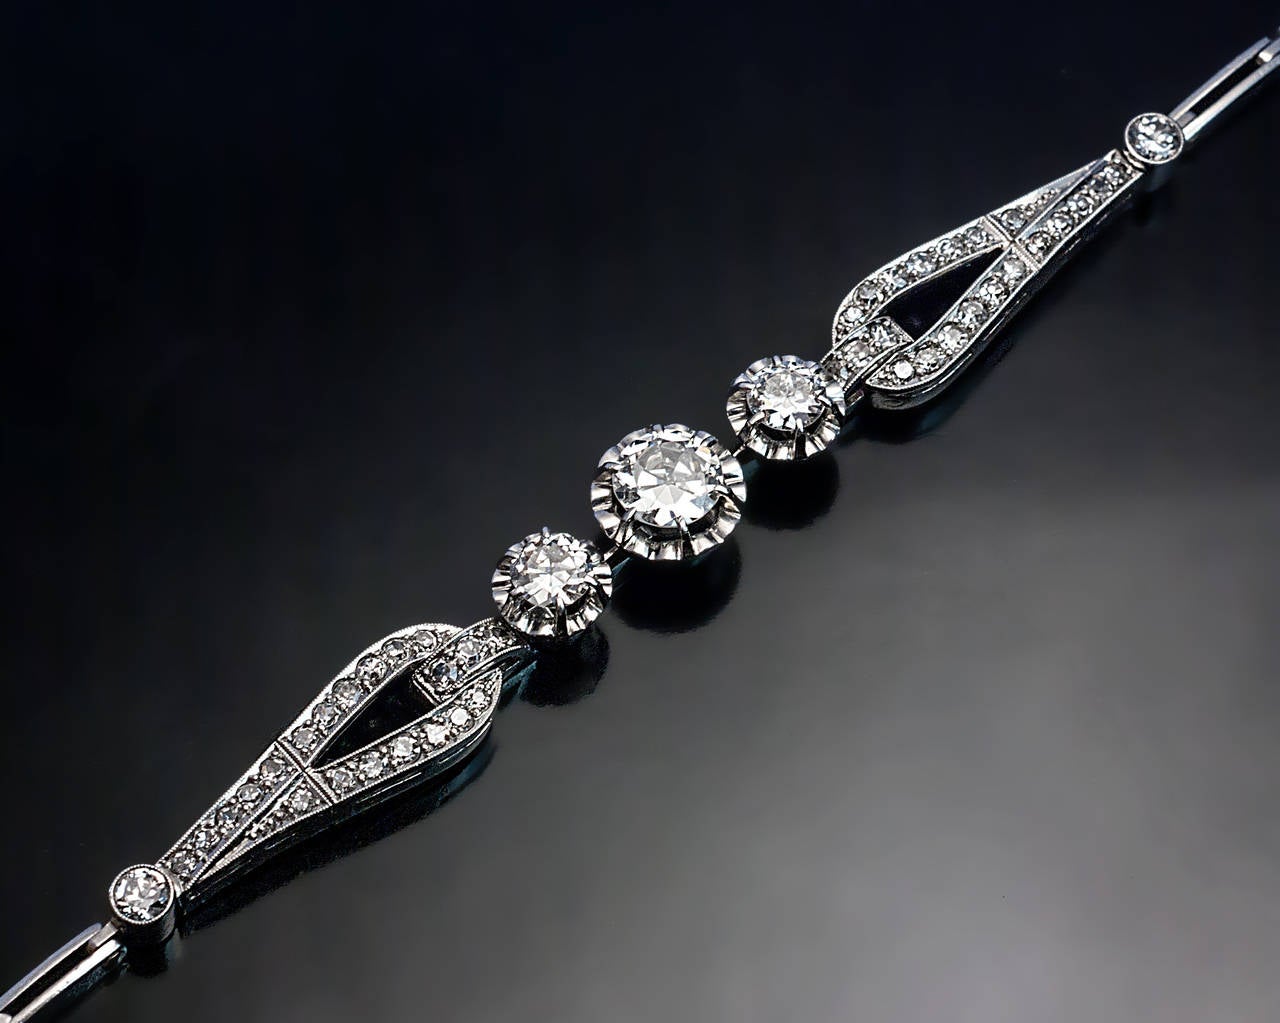 An elegant Art Deco diamond and platinum bracelet centered with three buttercup-set transitional brilliant cut diamonds flanked by two elongated drop-shaped links set with numerous single cut diamonds

Center diamond 5.85 x 5.9 x 2.8 mm